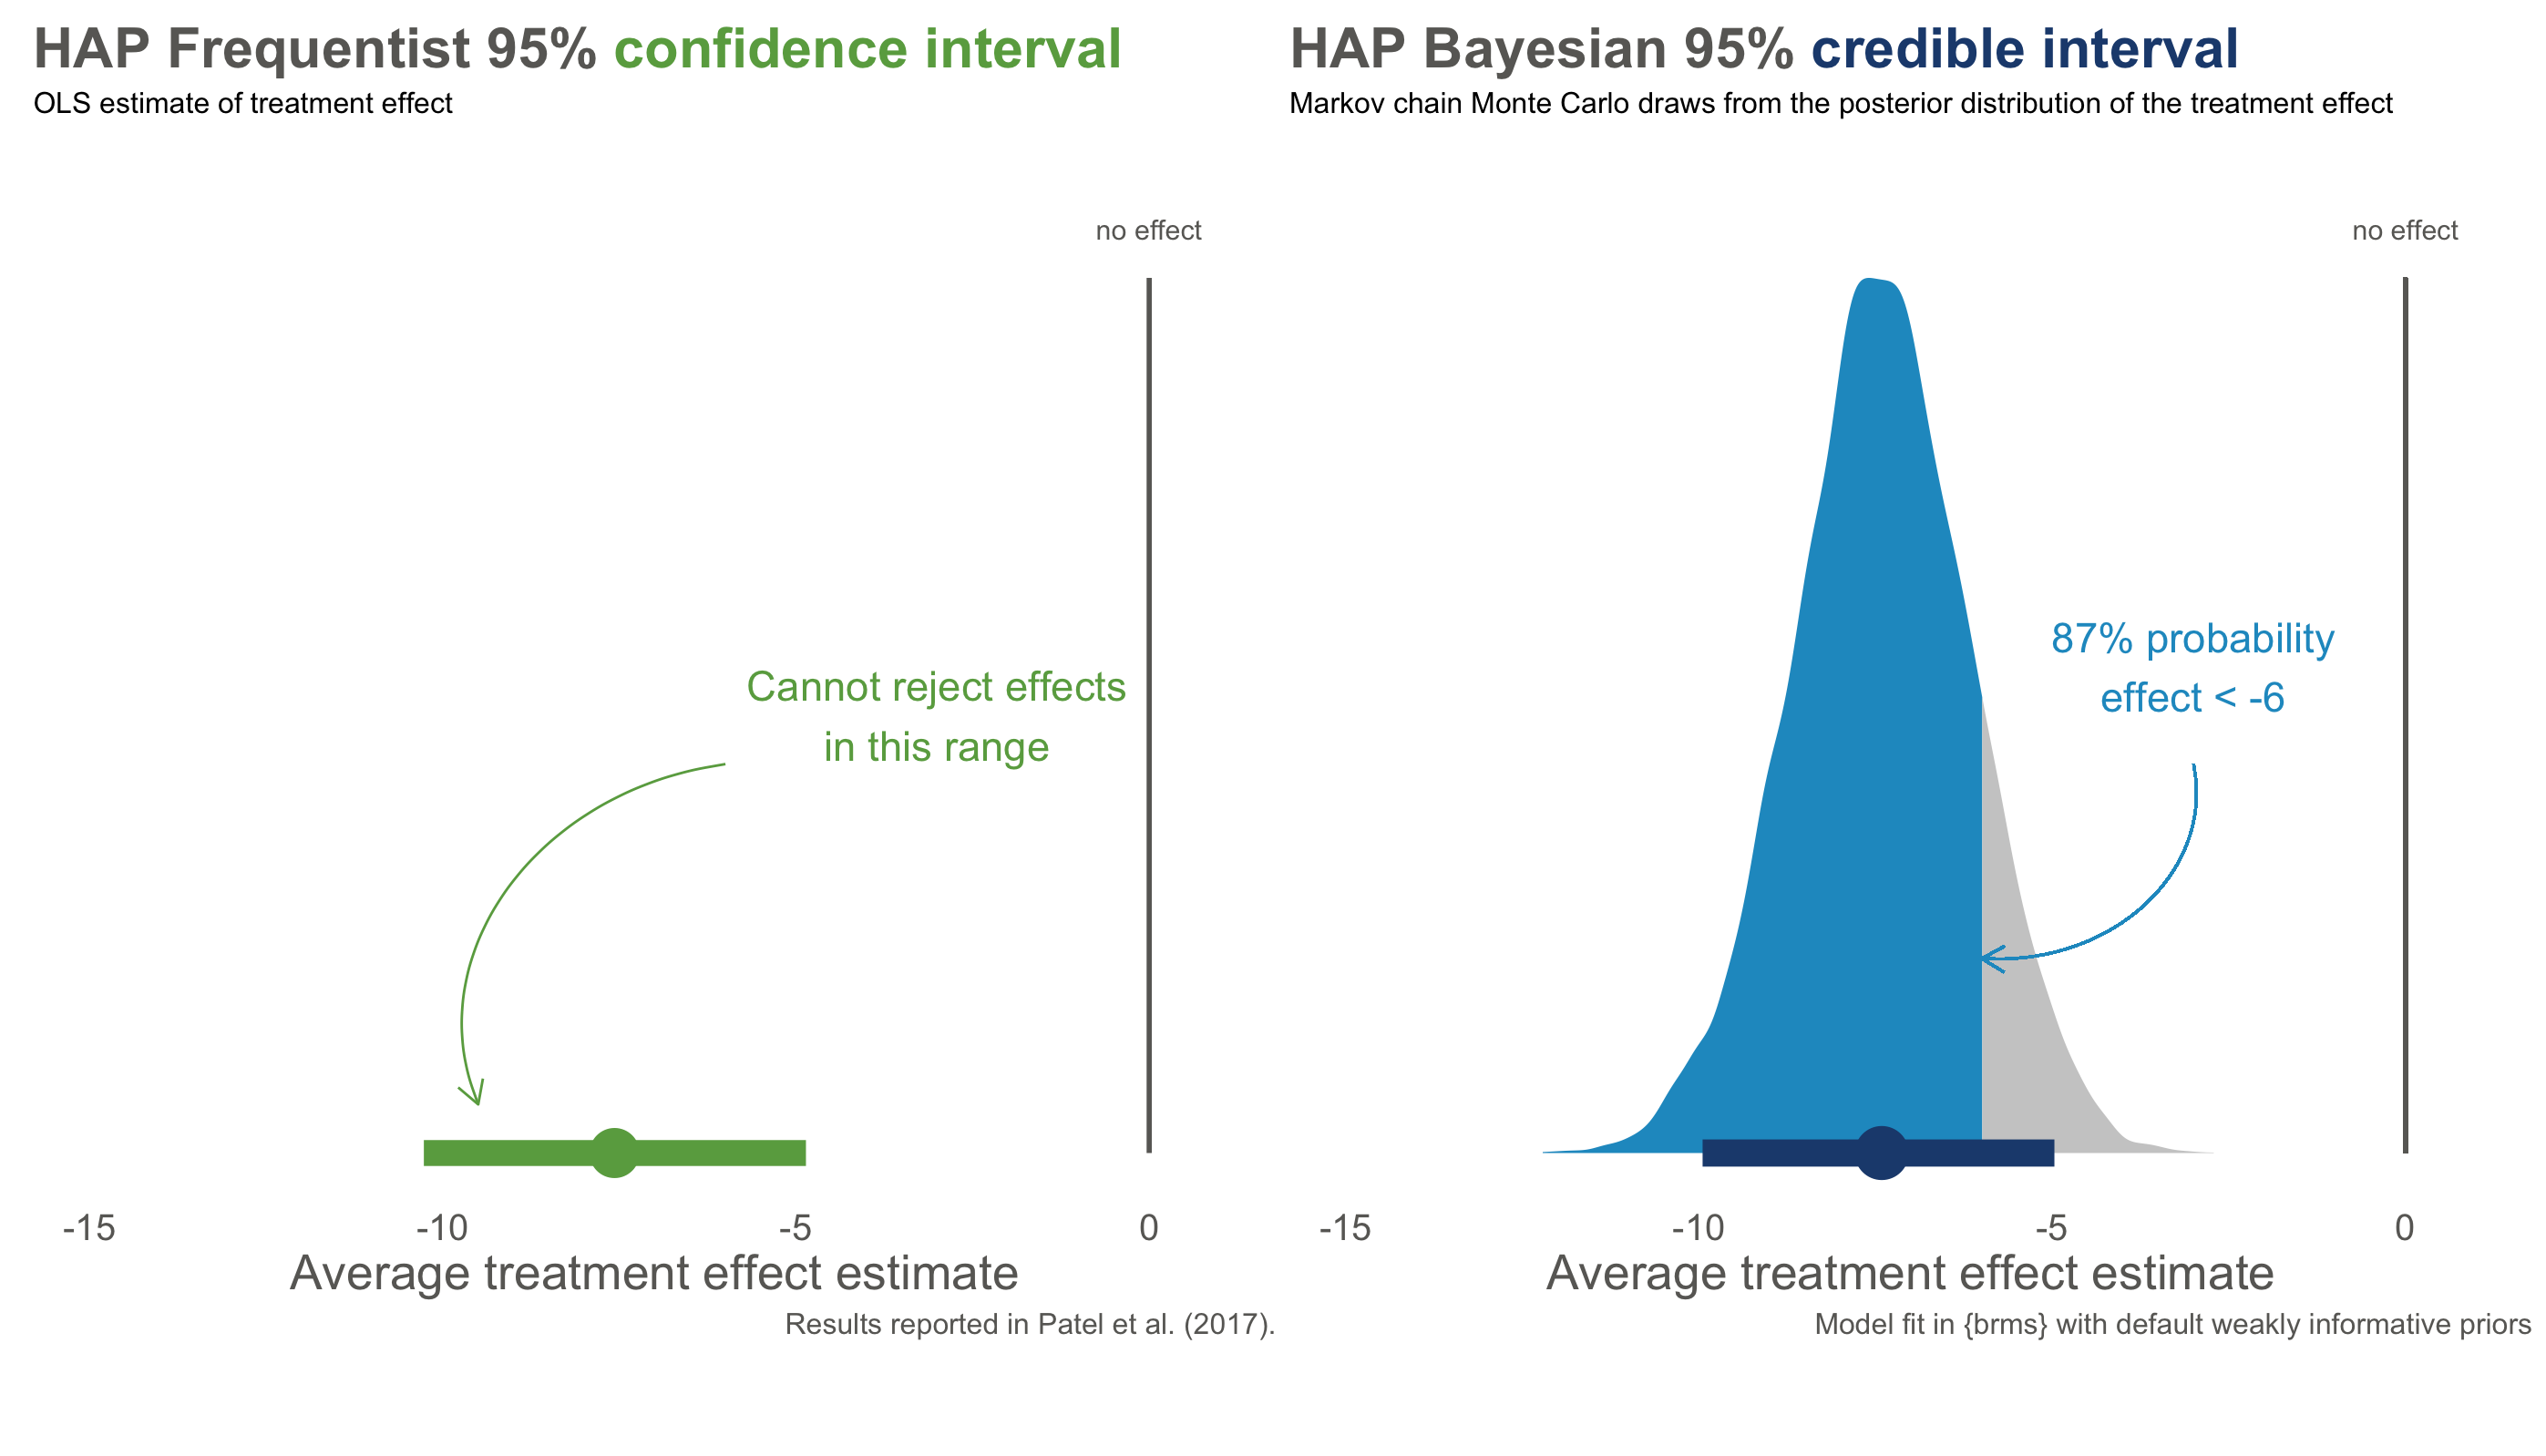 Bayesian re-analysis of HAP primary outcome of depression severity. Anonymized data provided by the authors.